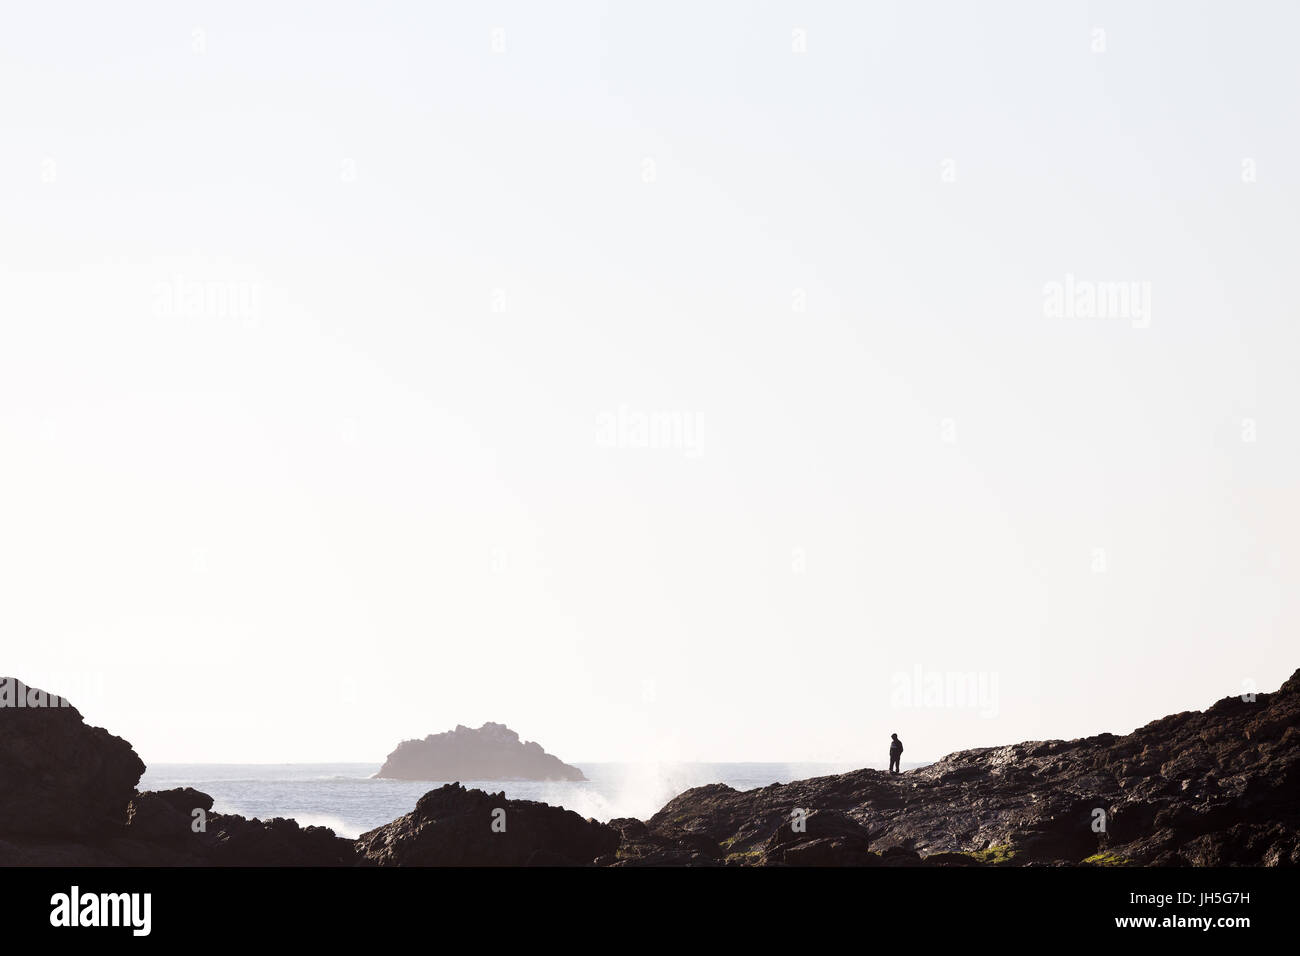 A person is silhouetted by bright morning light in a beautiful coastline seascape. Stock Photo